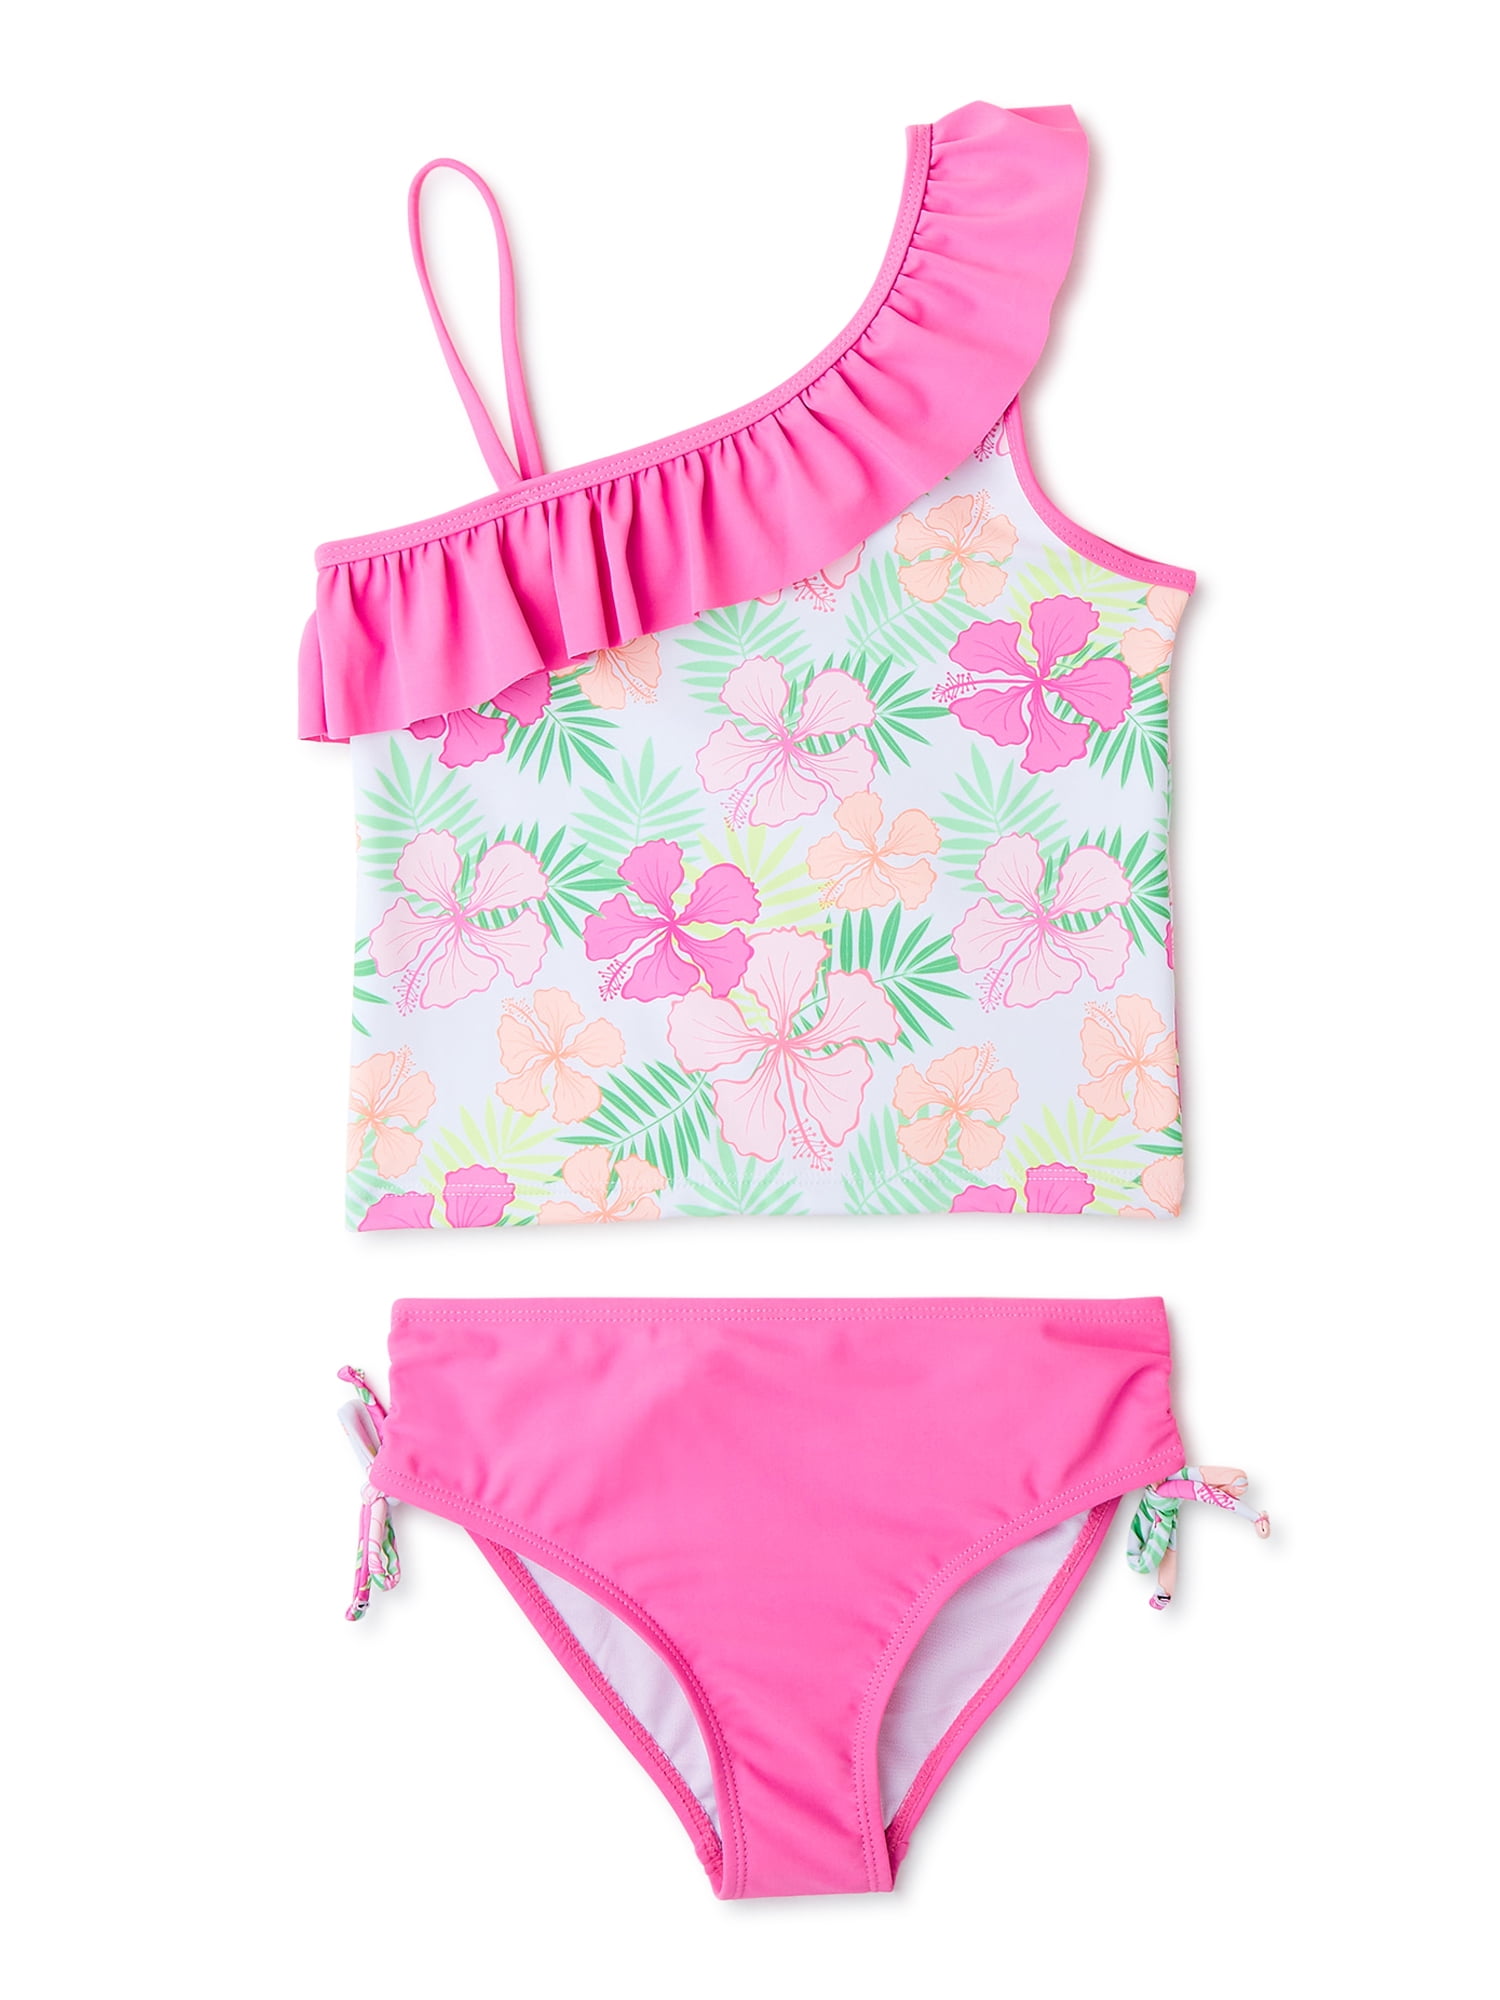 Details about   Carter's Girl's 3,6,9,18 Totally Magical Unicorn 2 Piece Bathing Suit UPF 50 